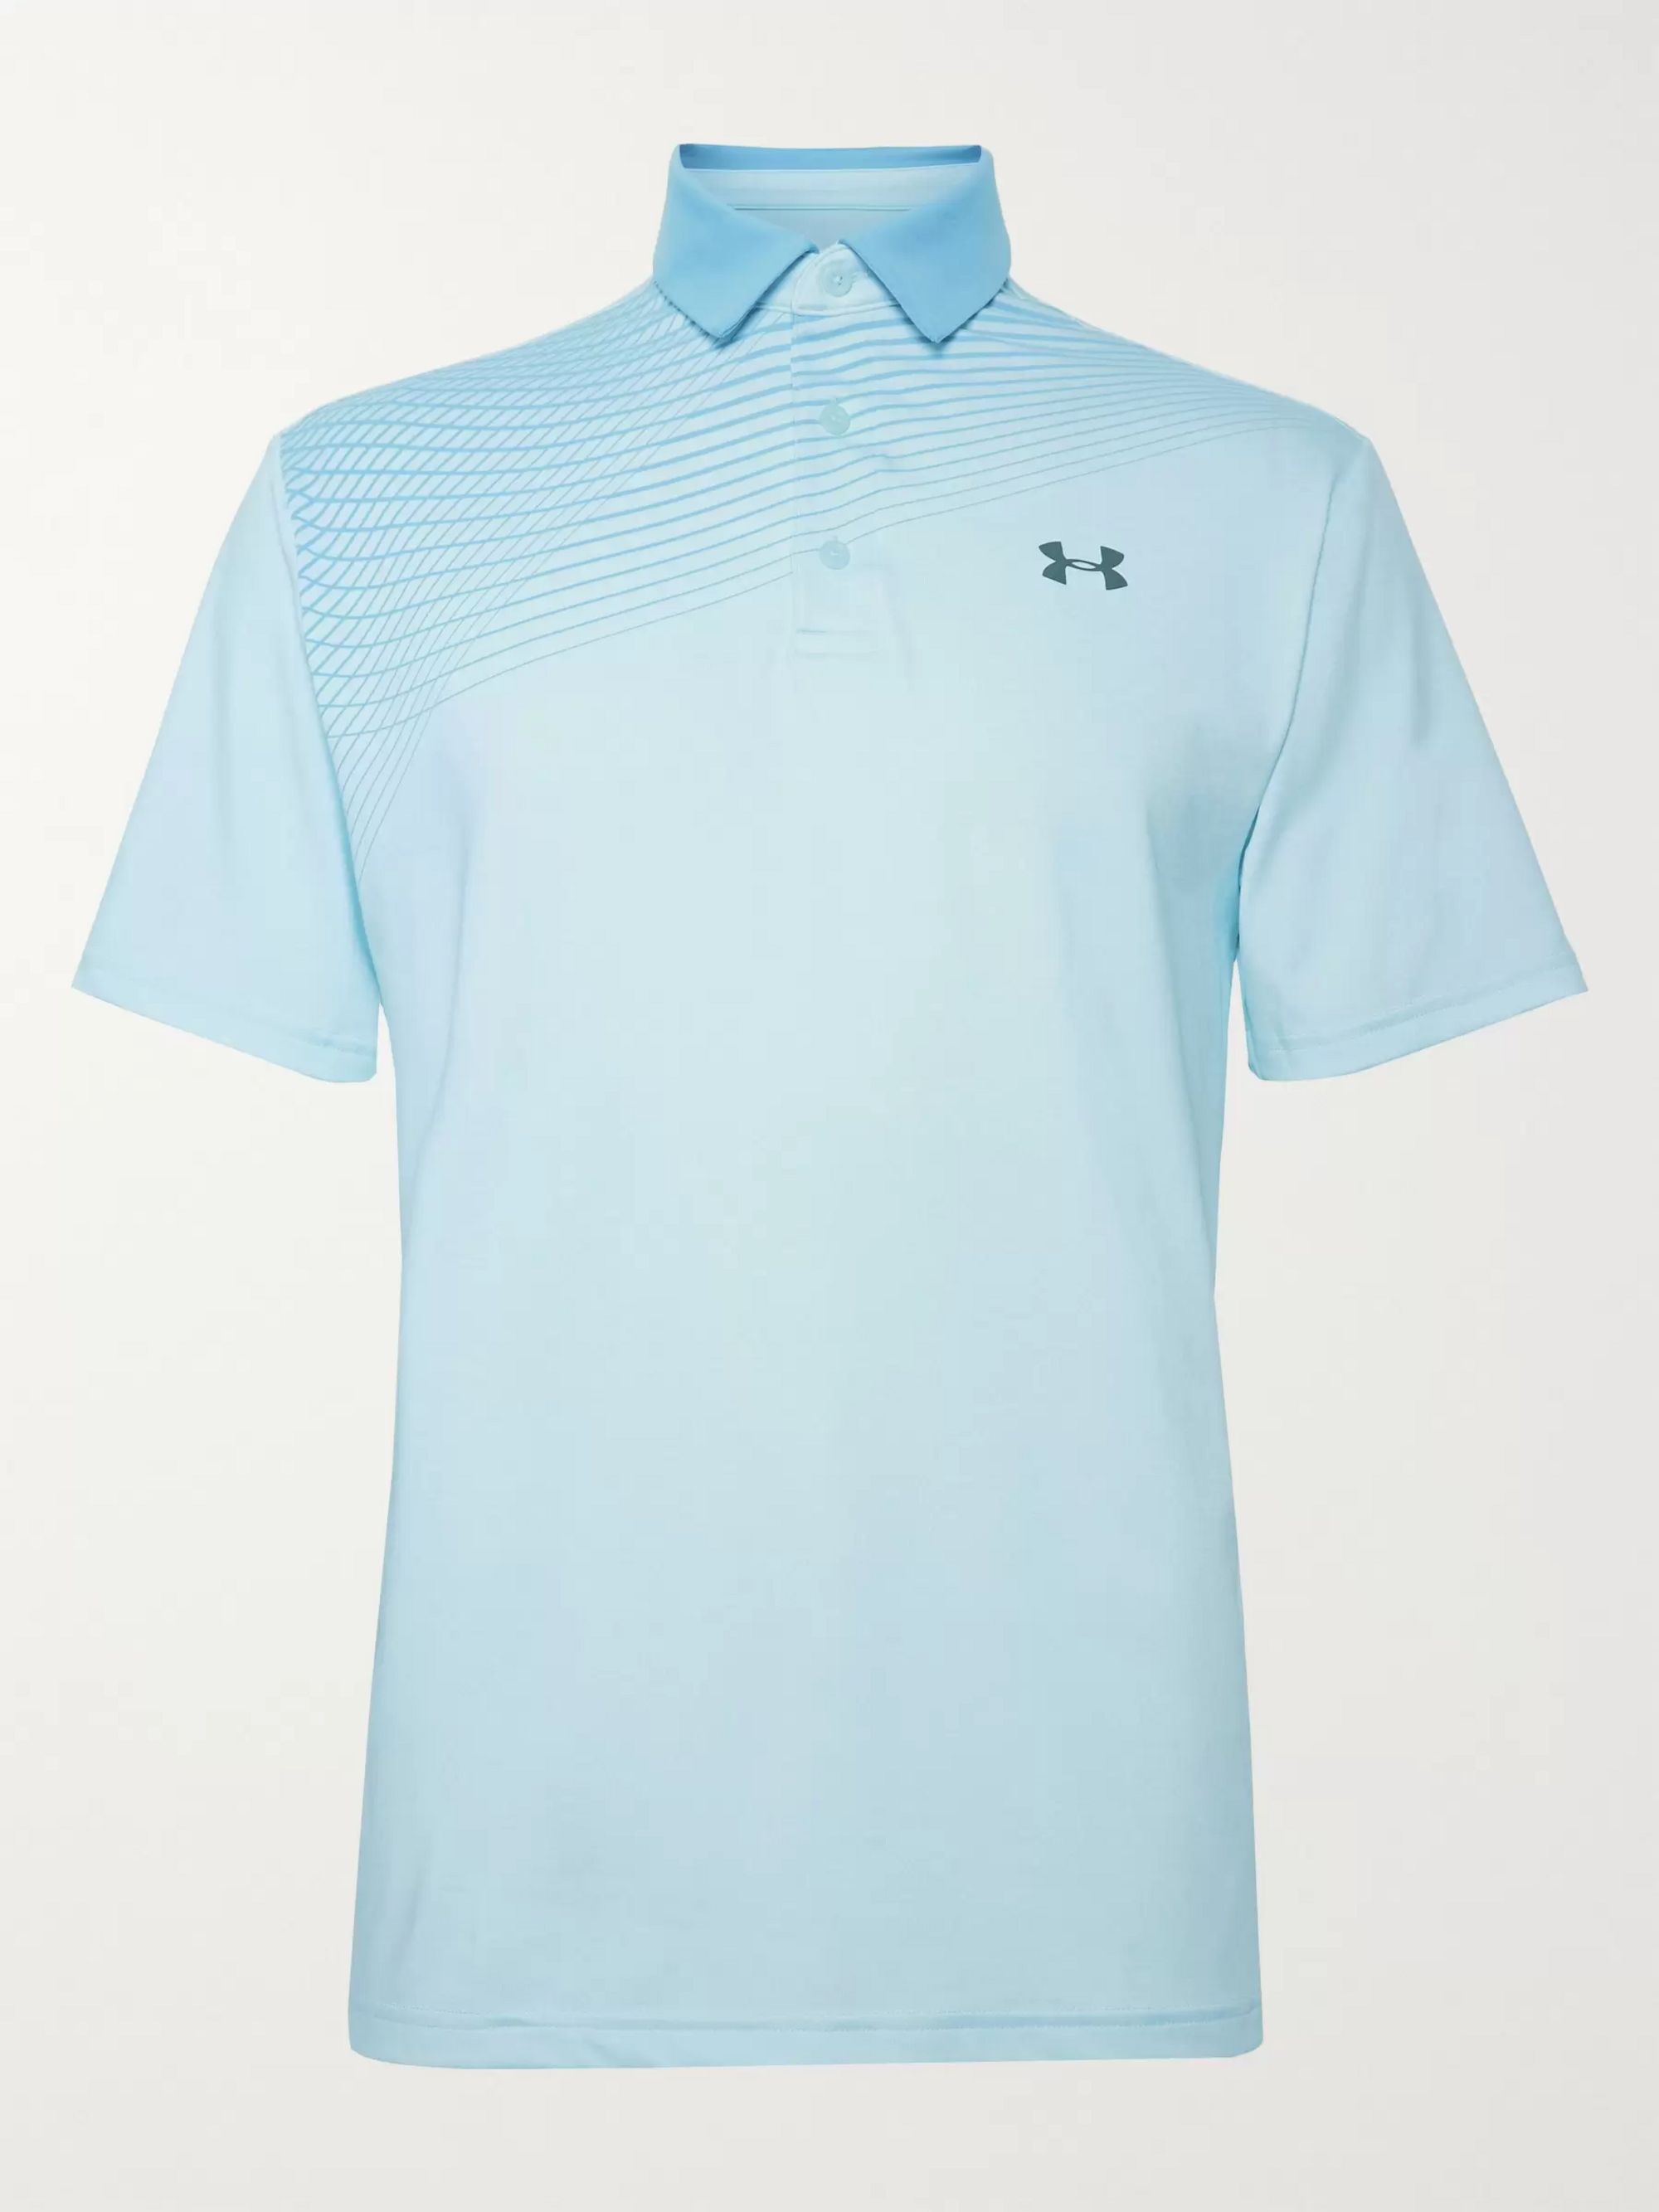 under armour collared shirts for boys